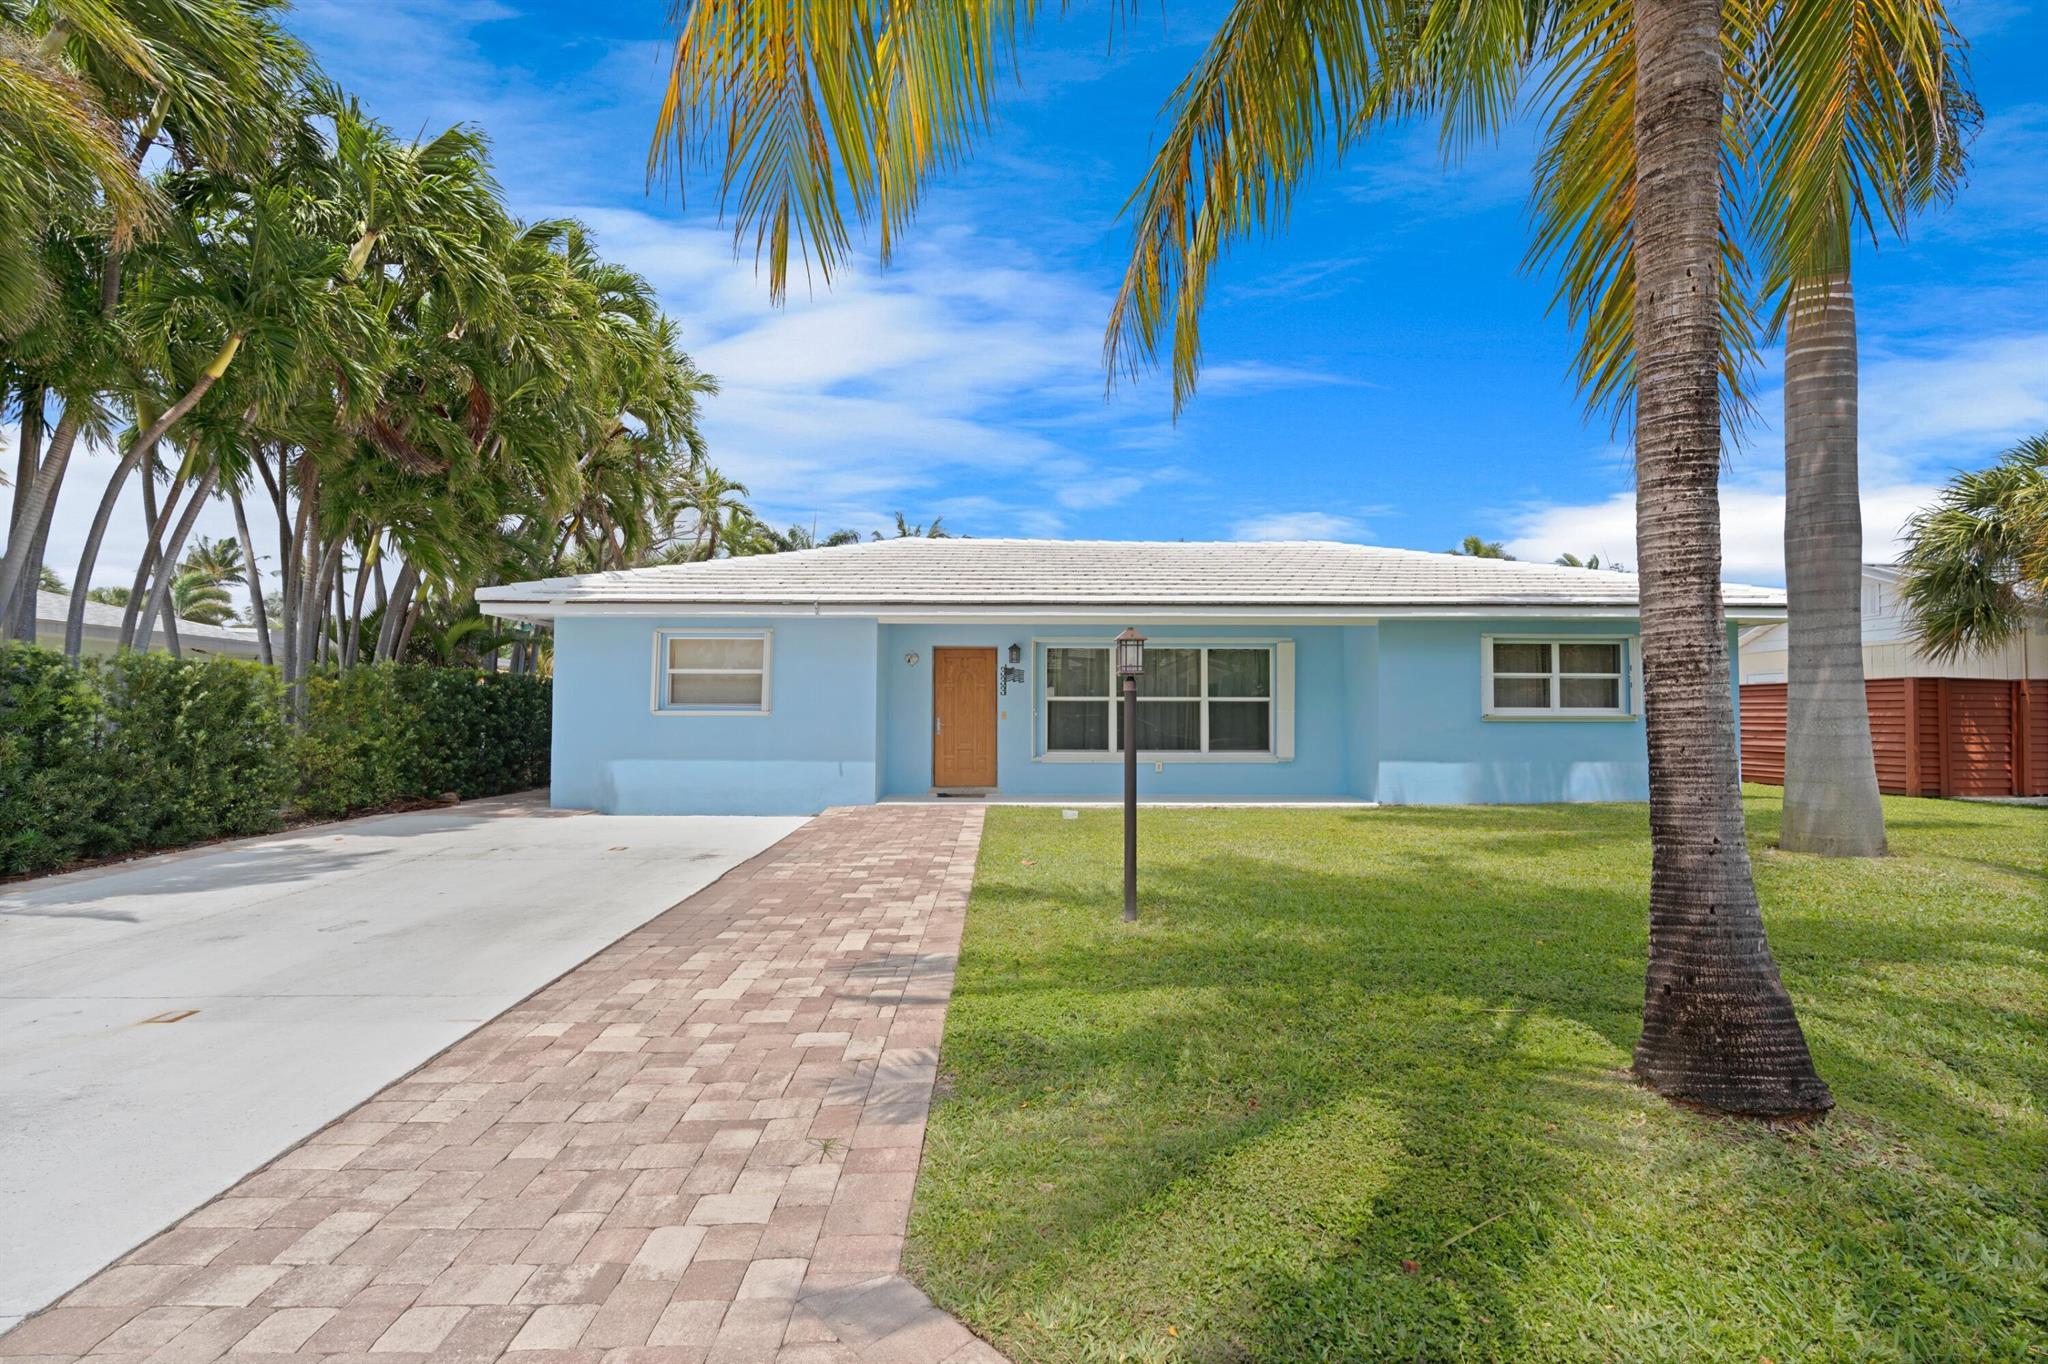 This 2BR 2BA (with converted garage for potential work space or bedroom)  has had recent renovations to the entire inside and back yard / pool area. The inviting pool is screened in with a private, tree-lined fenced back yard. This home is ideally located - two blocks from the Palm Beach Inlet and walking distance to Sailfish Marina - in the town of Palm Beach Shores. Palm Beach Shores is a small town located on the southern tip of Singer Island. Surrounded by ocean, inlet and the Intracoastal, this little enclave of homes is a gem of a neighborhood with its own police and fire departments, community activities, beach access and more. Photos coming soon.